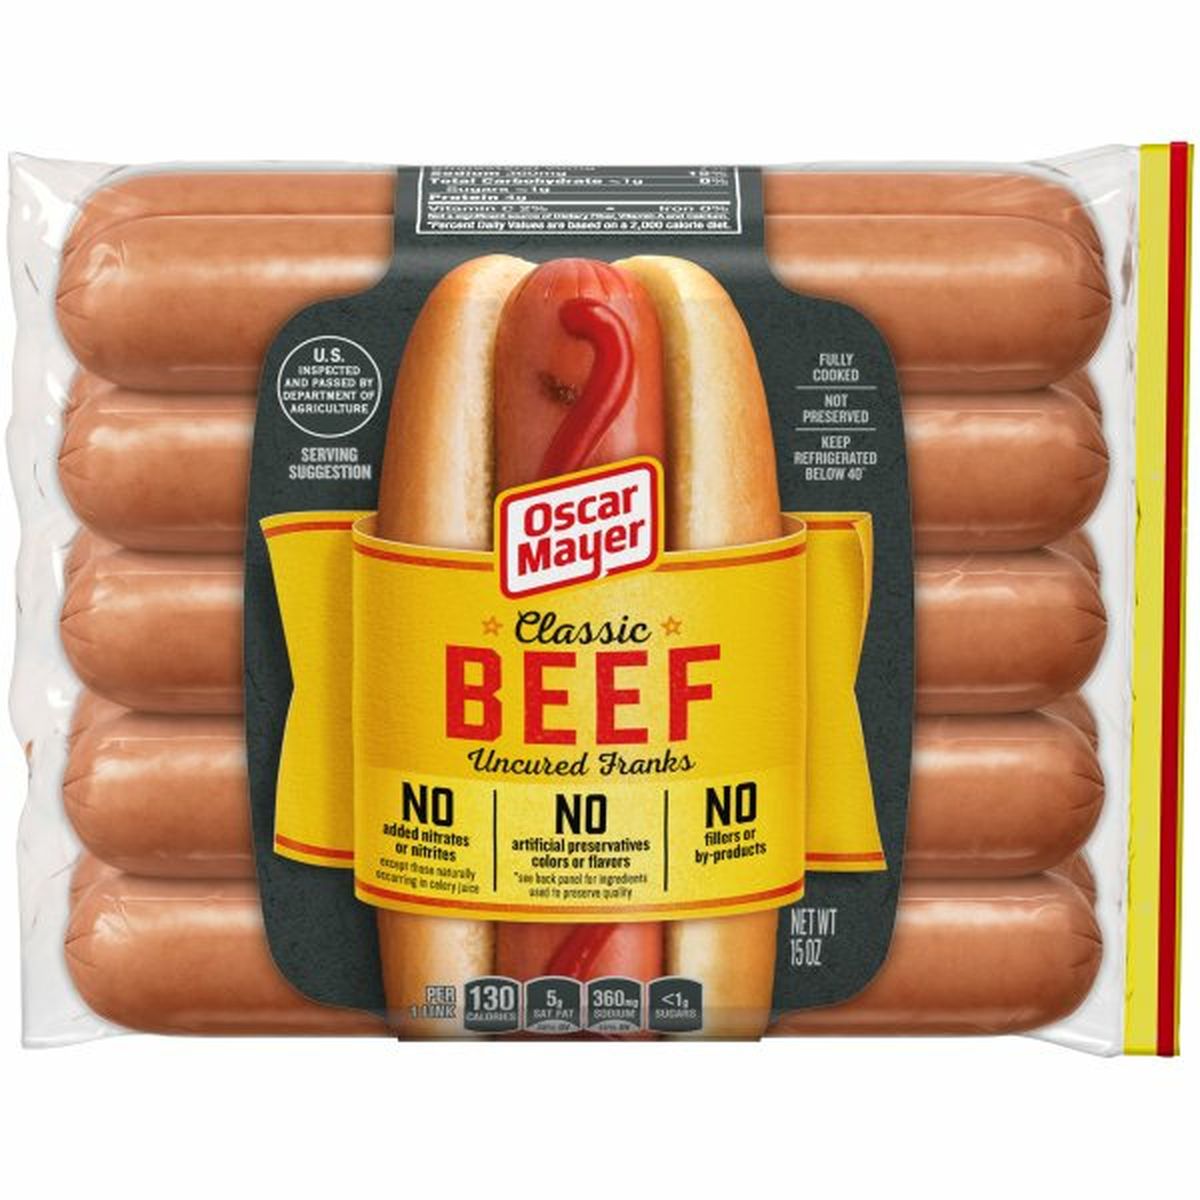 Calories in Oscar Mayer Classic Beef Uncured Franks